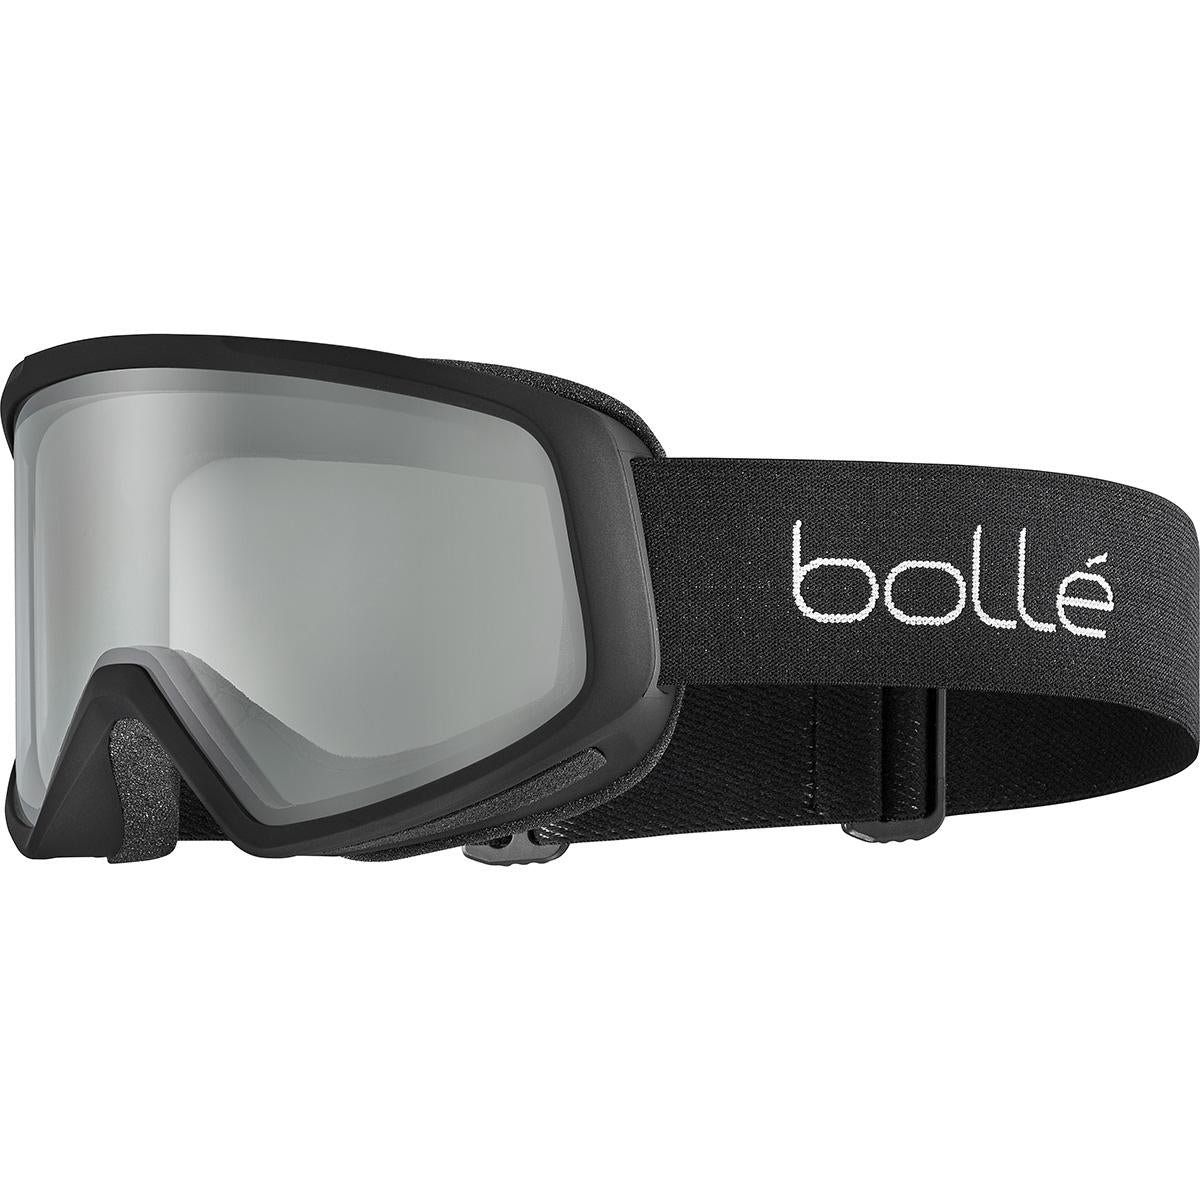 Bolle Bedrock Goggles